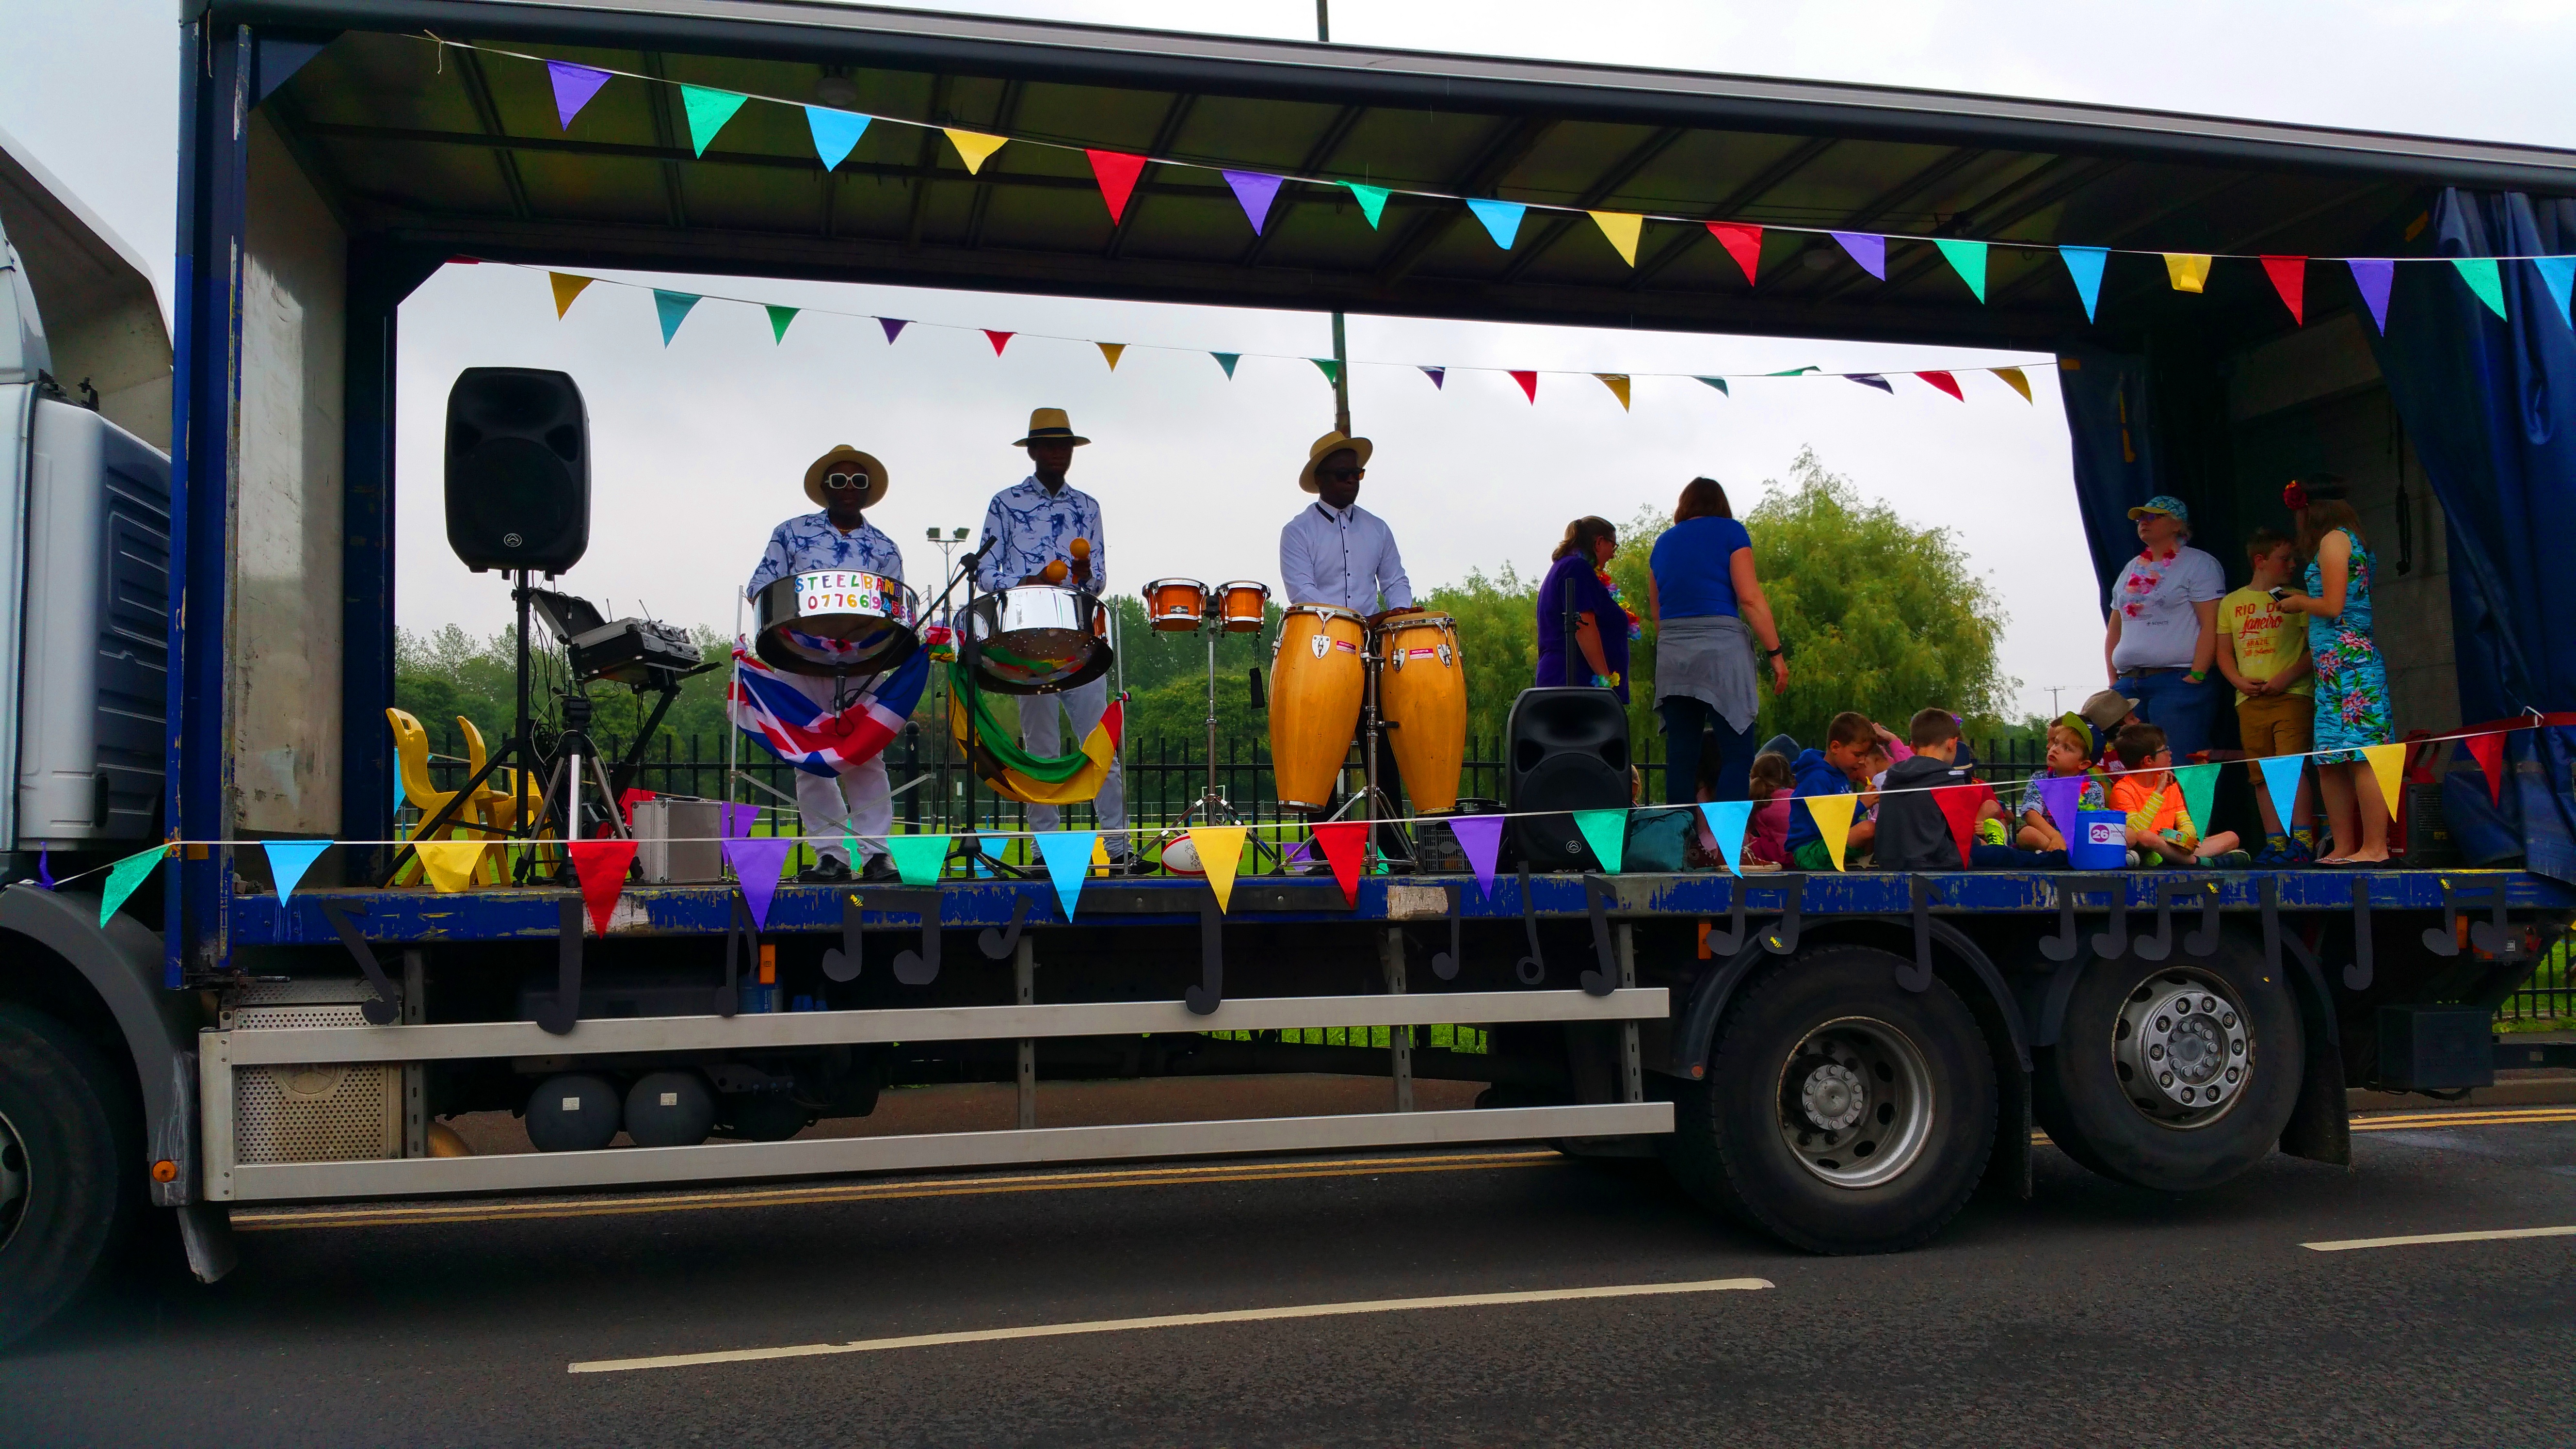 Kings palace steel band on tour